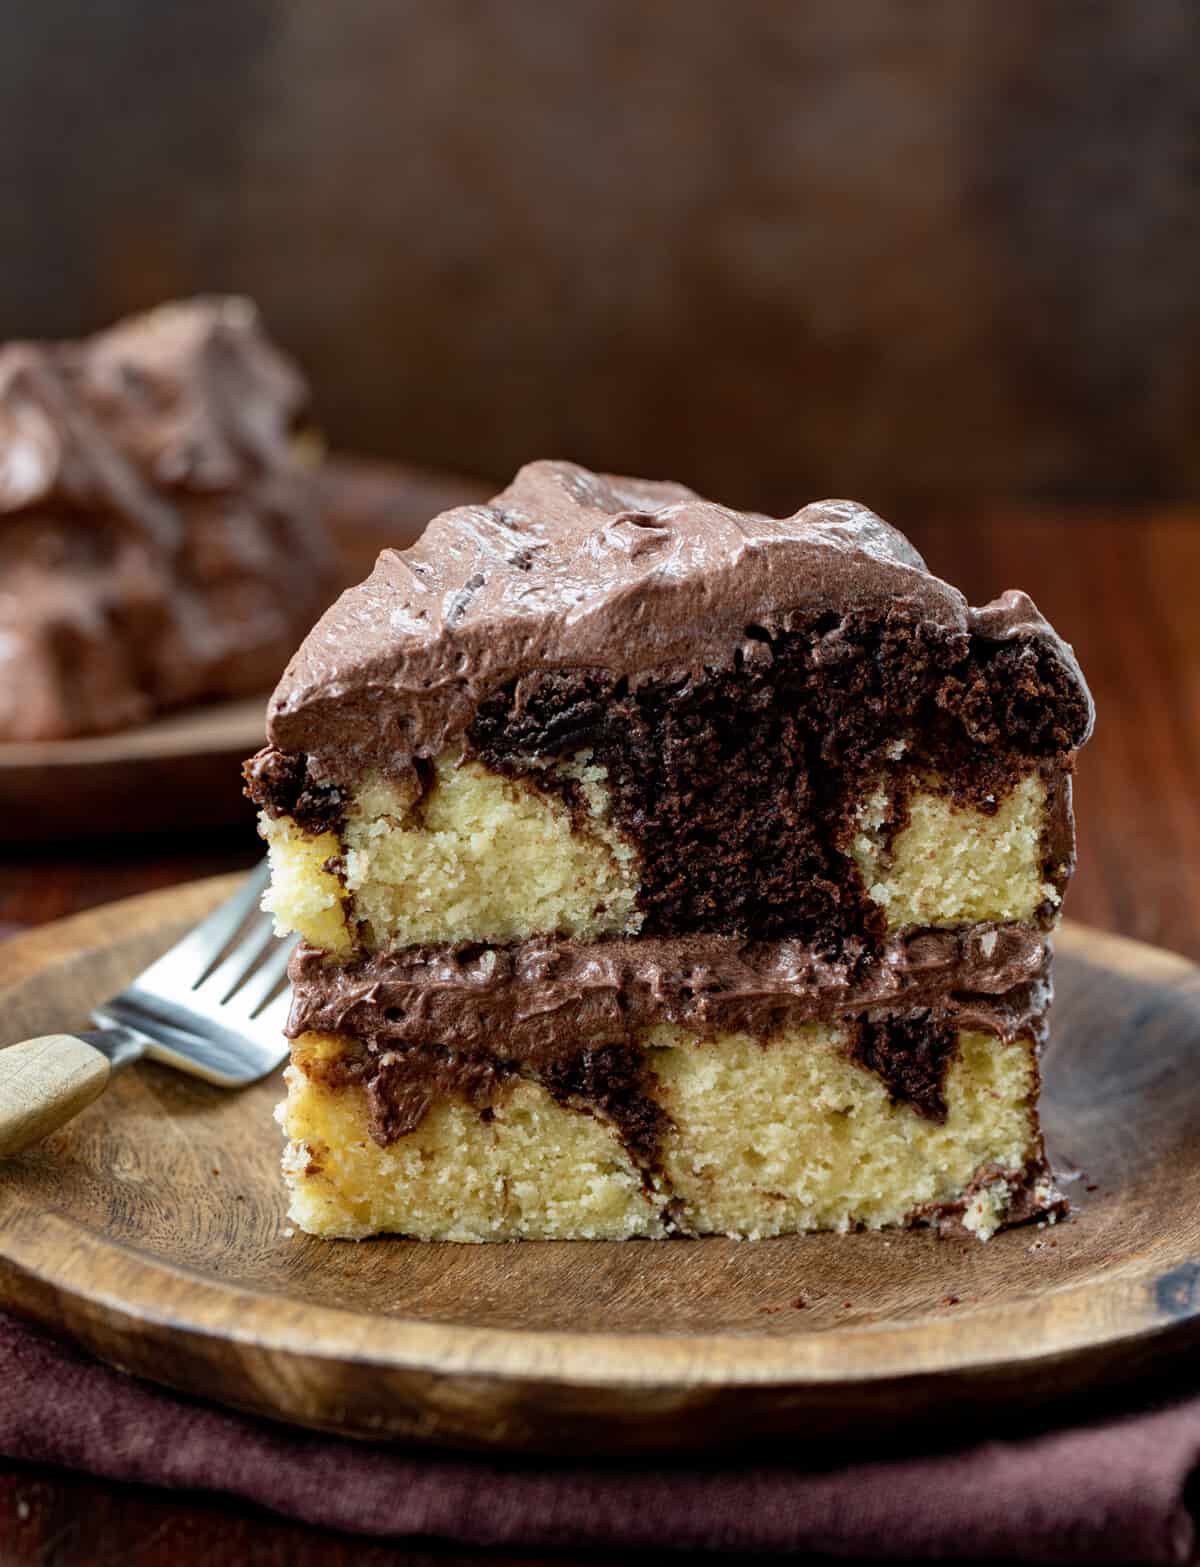 Piece of Marble Cake on a Plate with Chocolate Ermine Frosting.